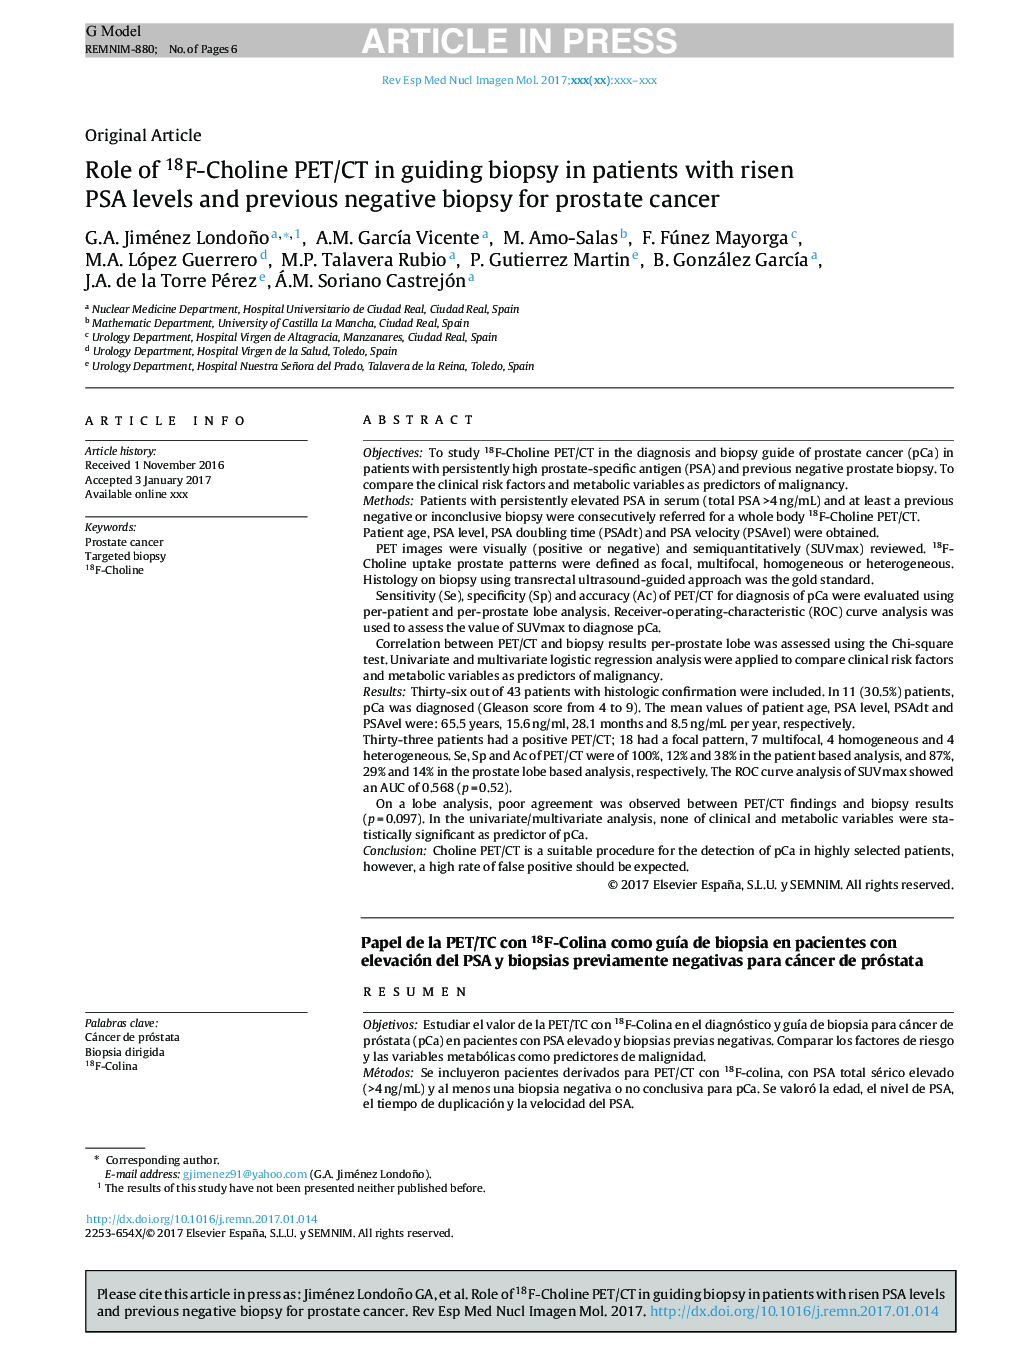 Role of 18F-Choline PET/CT in guiding biopsy in patients with risen PSA levels and previous negative biopsy for prostate cancer